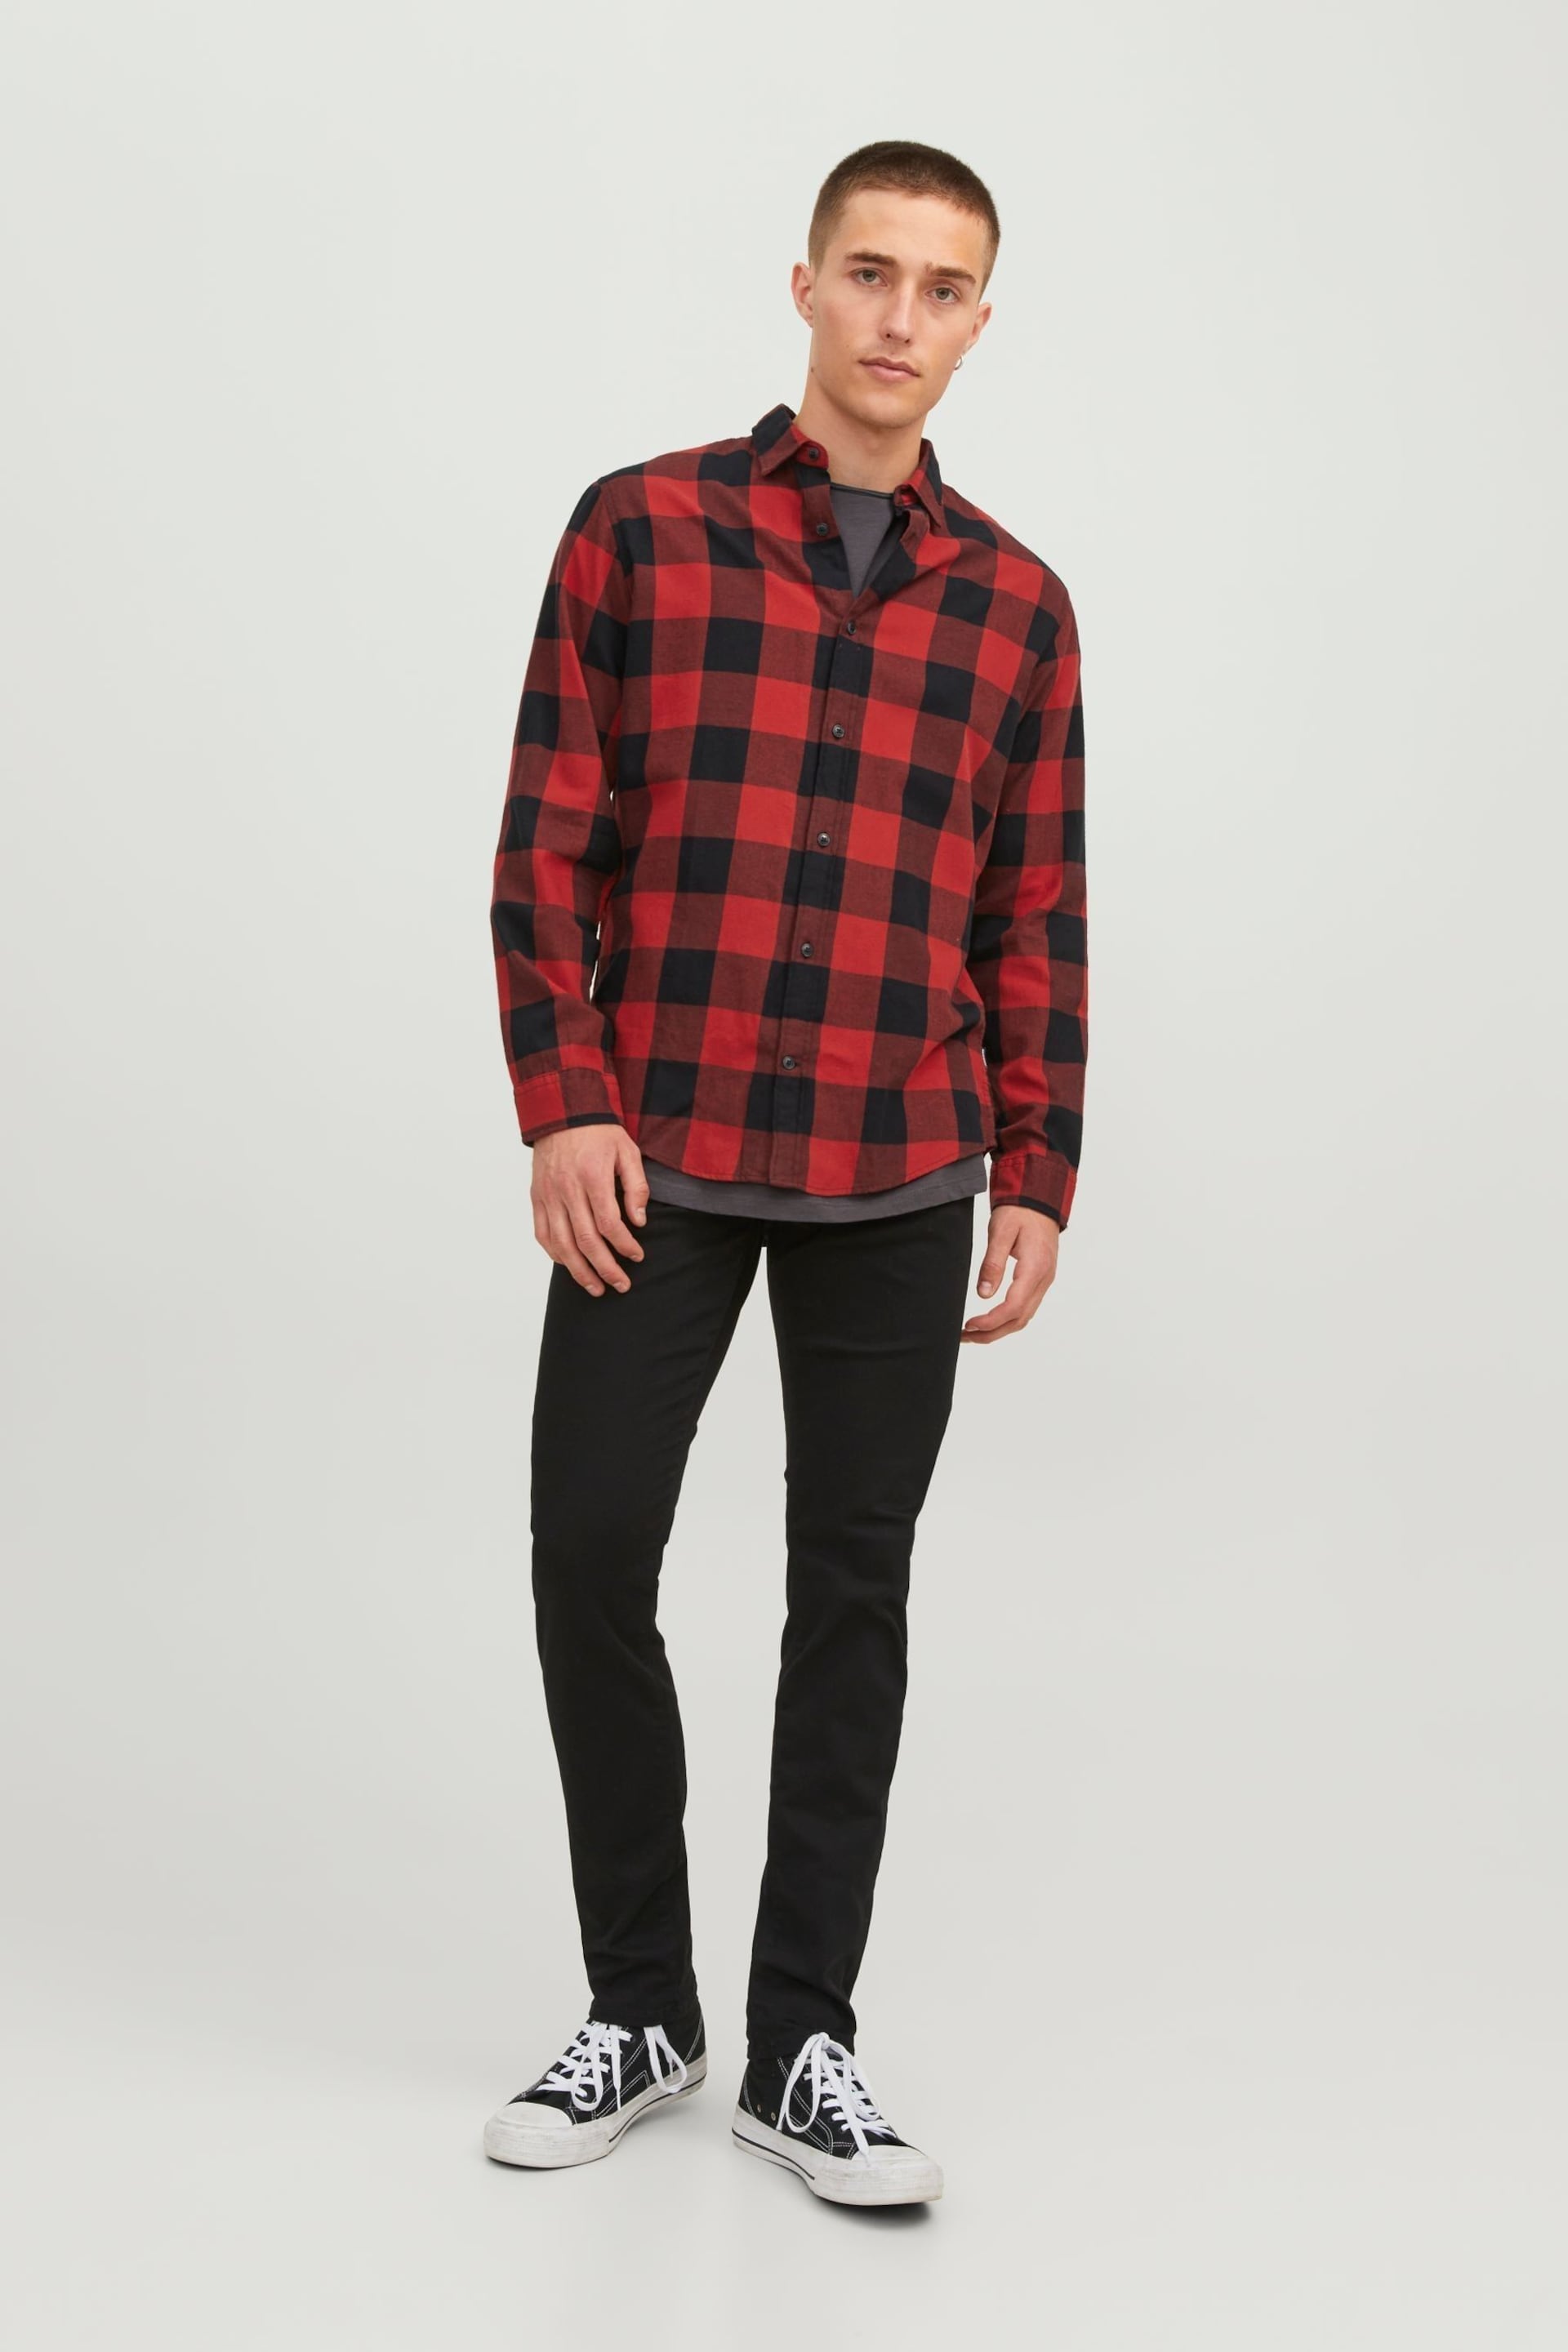 JACK & JONES Red Button Up Shirt - Image 1 of 6